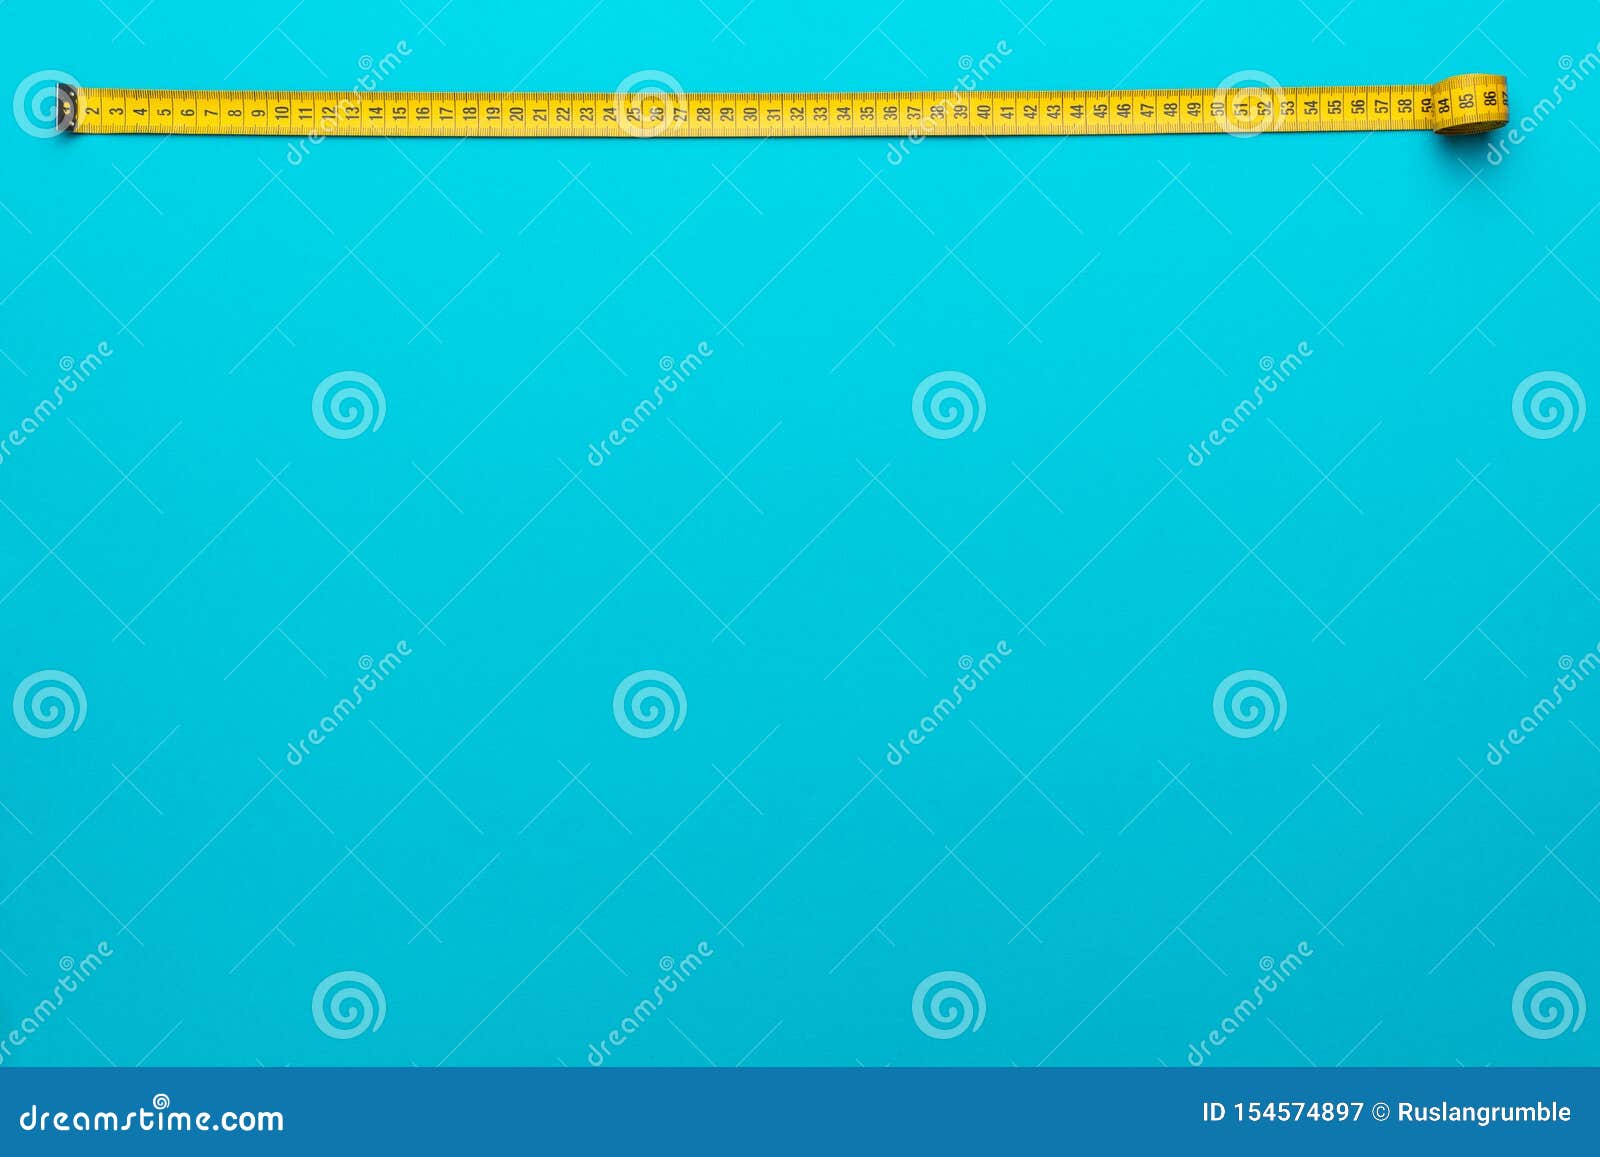 Top view of yellow soft measuring tape. Minimalist flat lay image